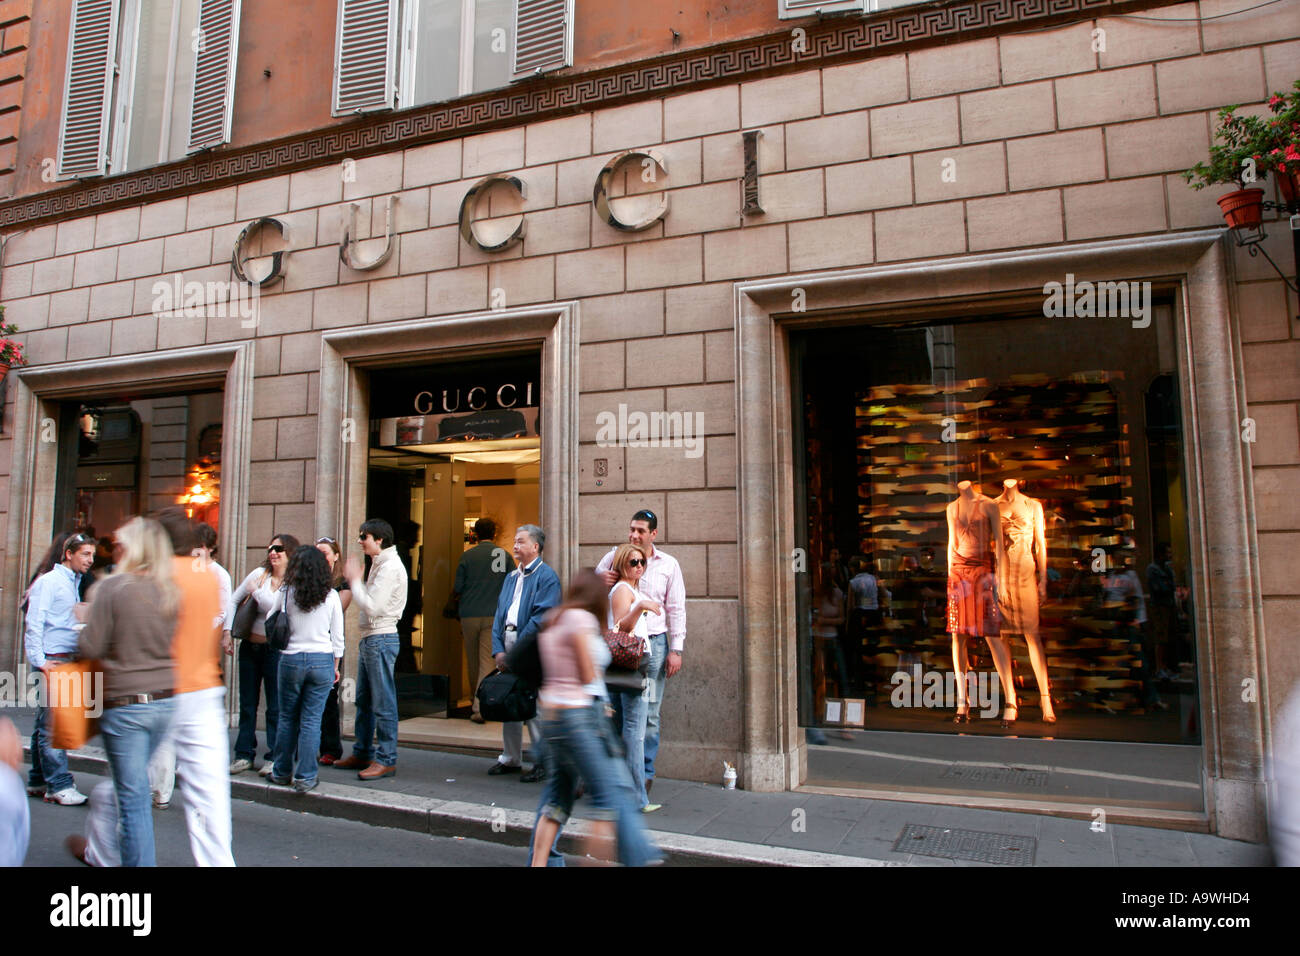 Gucci shop in Rome Italy Stock Photo: 4062675 - Alamy